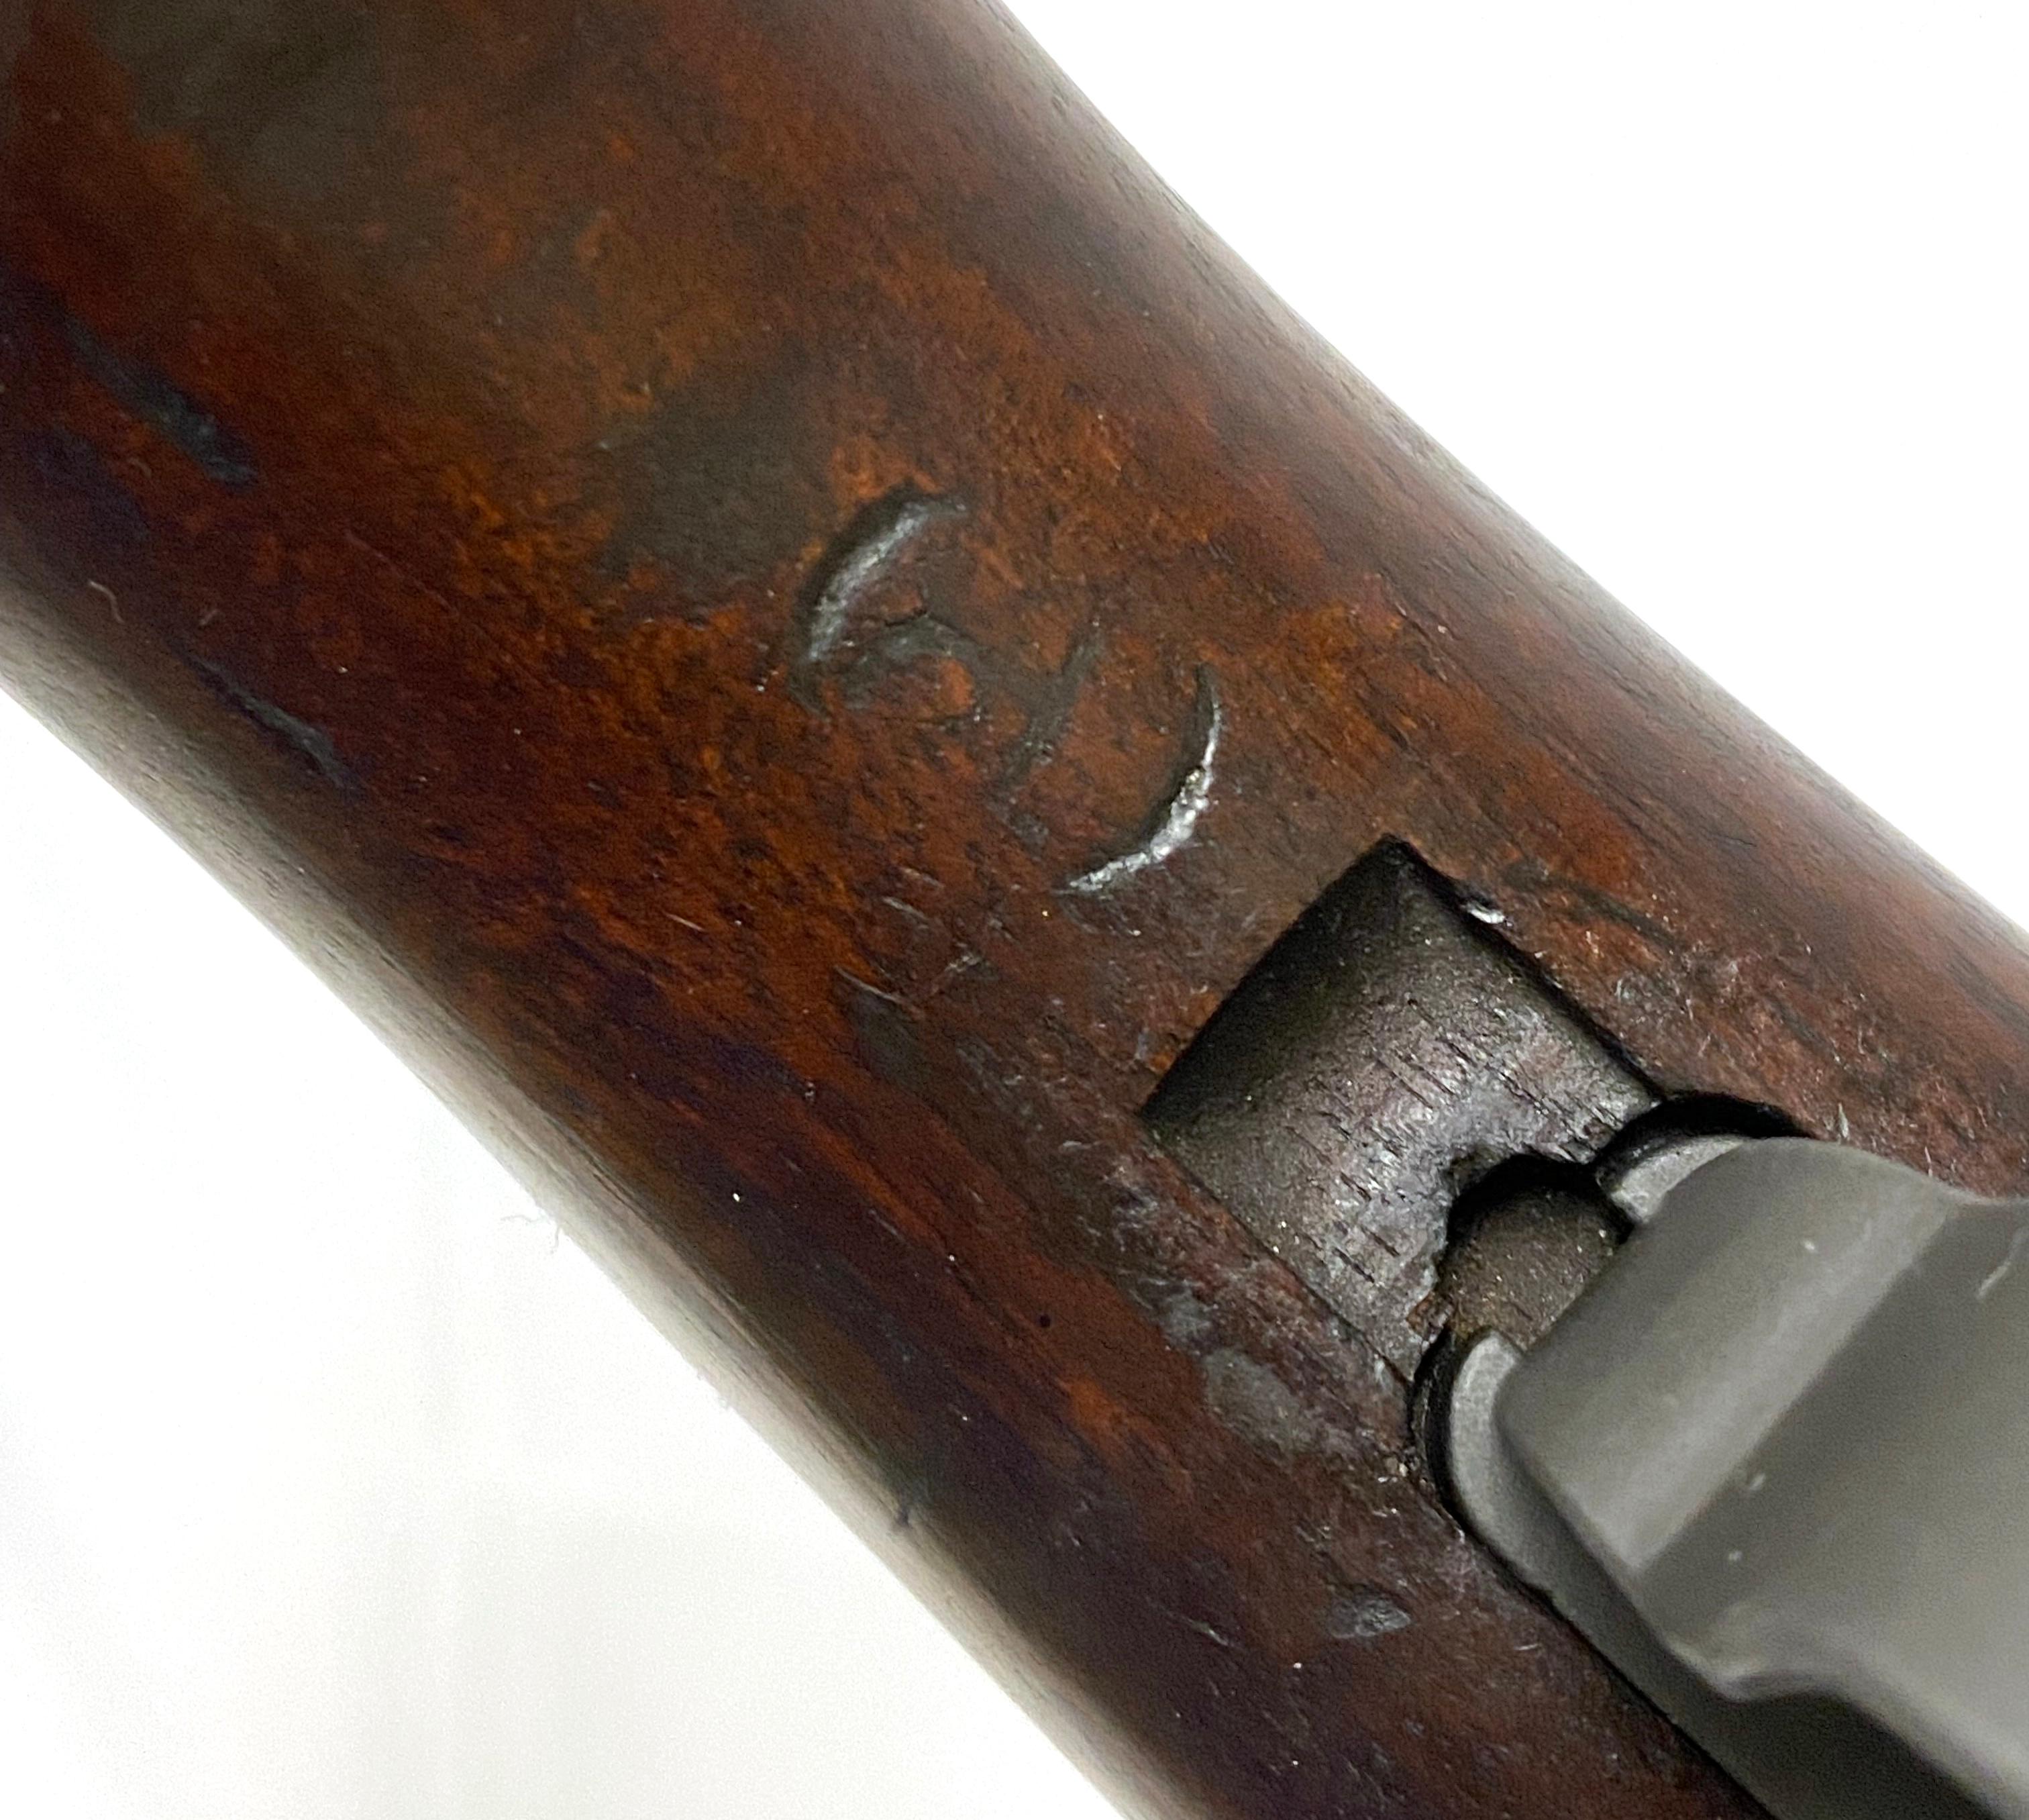 Excellent 1944 Springfield Armory M1-D Garand .30 Cal Sniper Rifle with M84 Scope & CMP CoA